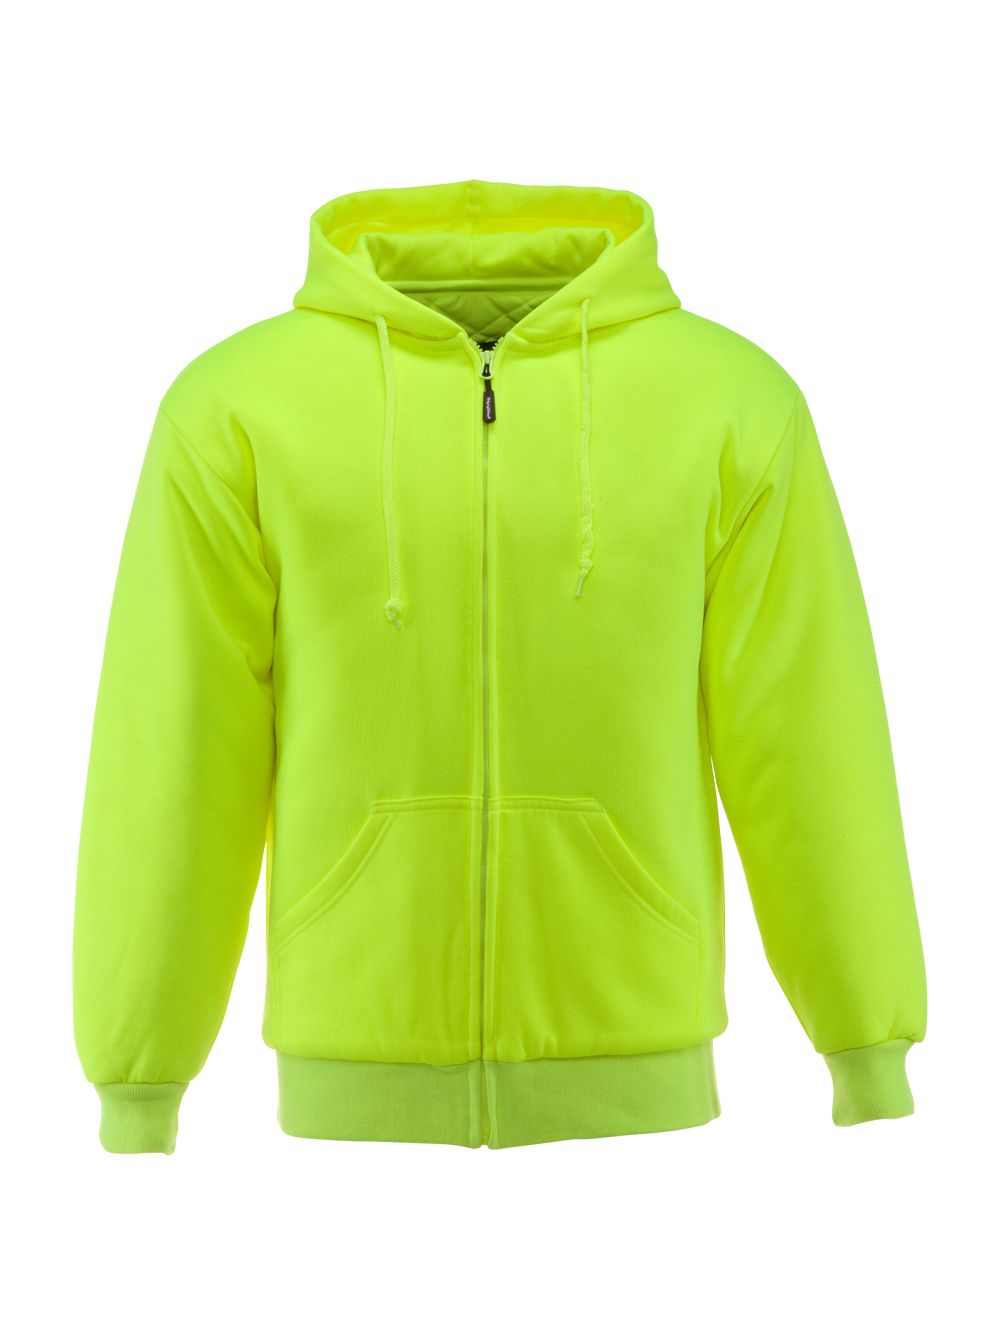 RefrigiWear HiVis Insulated Quilted Sweatshirt | Lime | Fit: Big & Tall | Ragg Wool/Polyester/Fabric | M